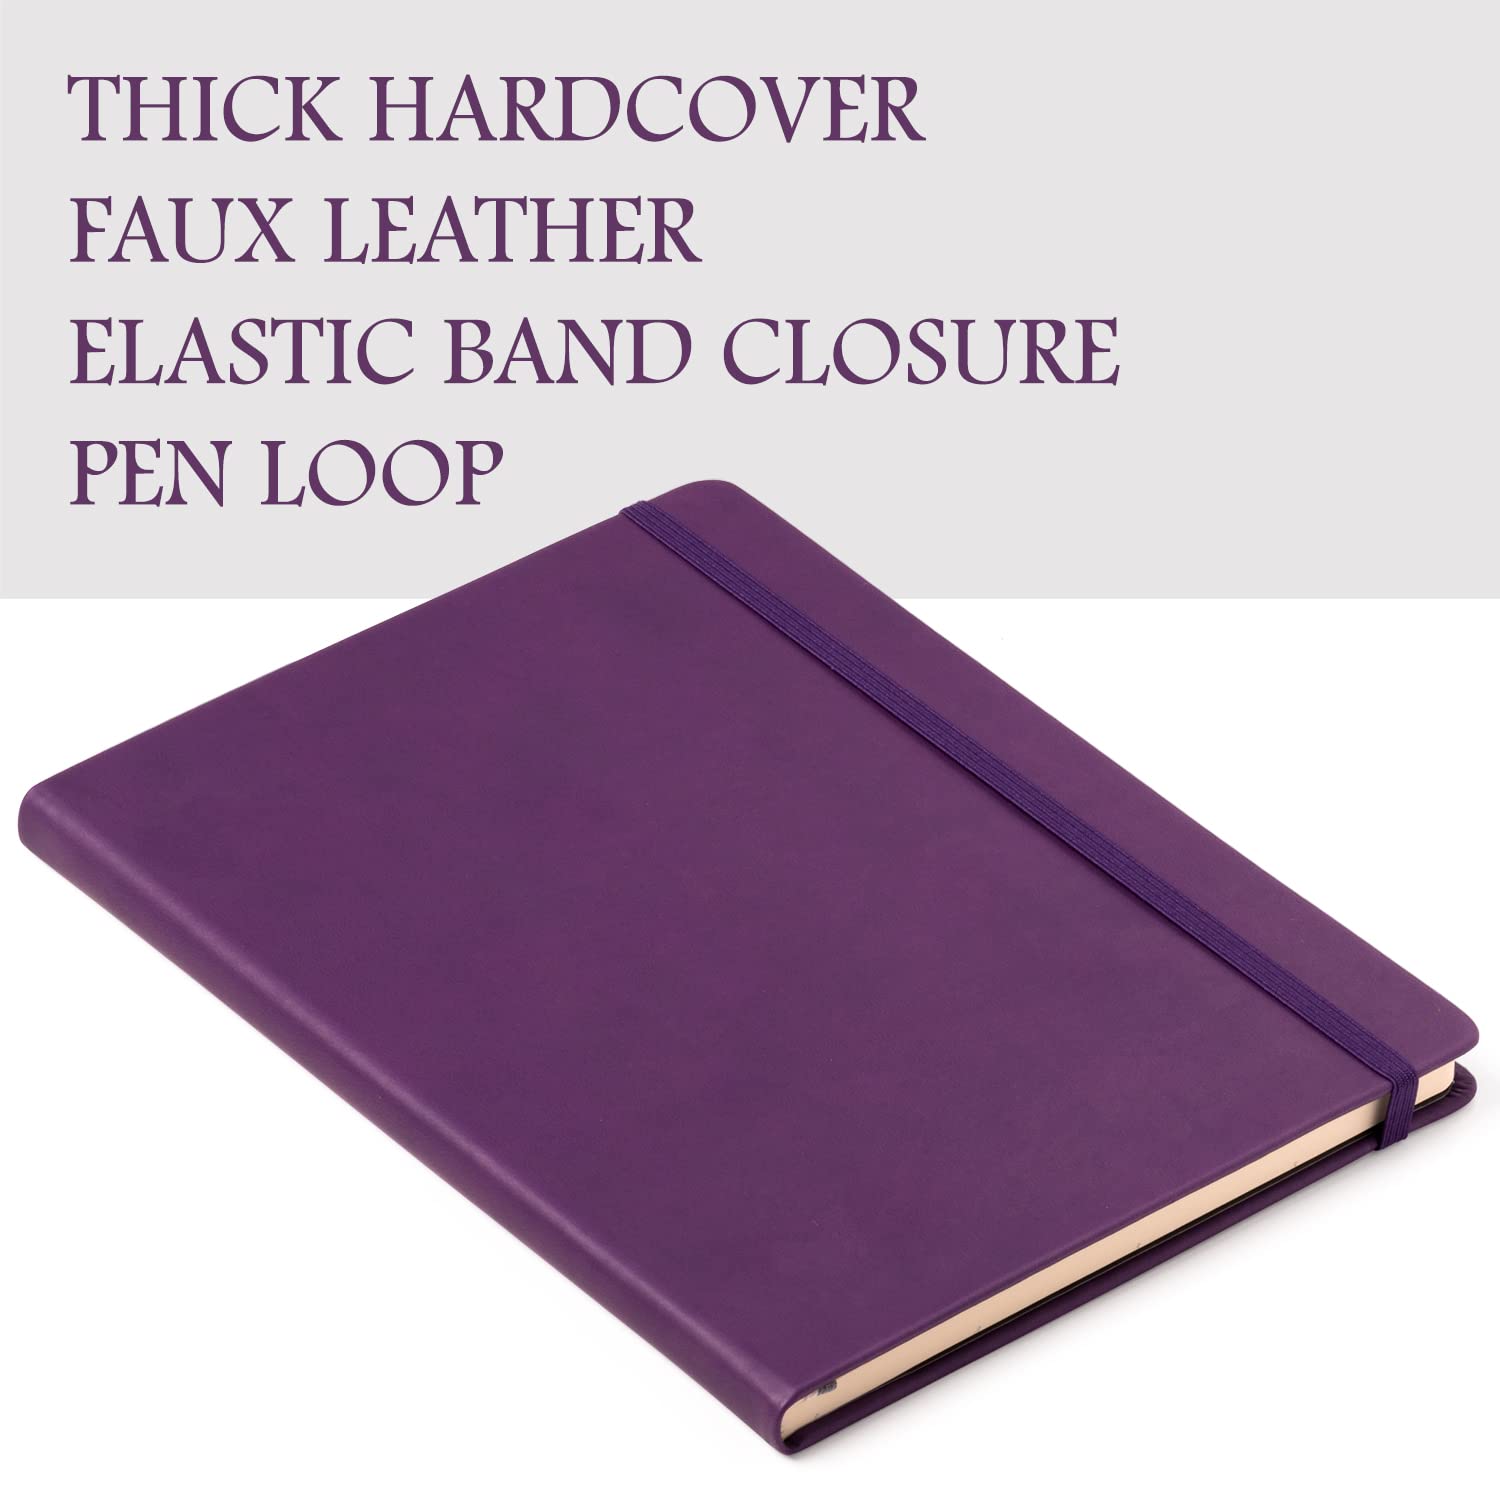 Eggplant Eccolo Journal with 192 Pages of Cream Lined Paper